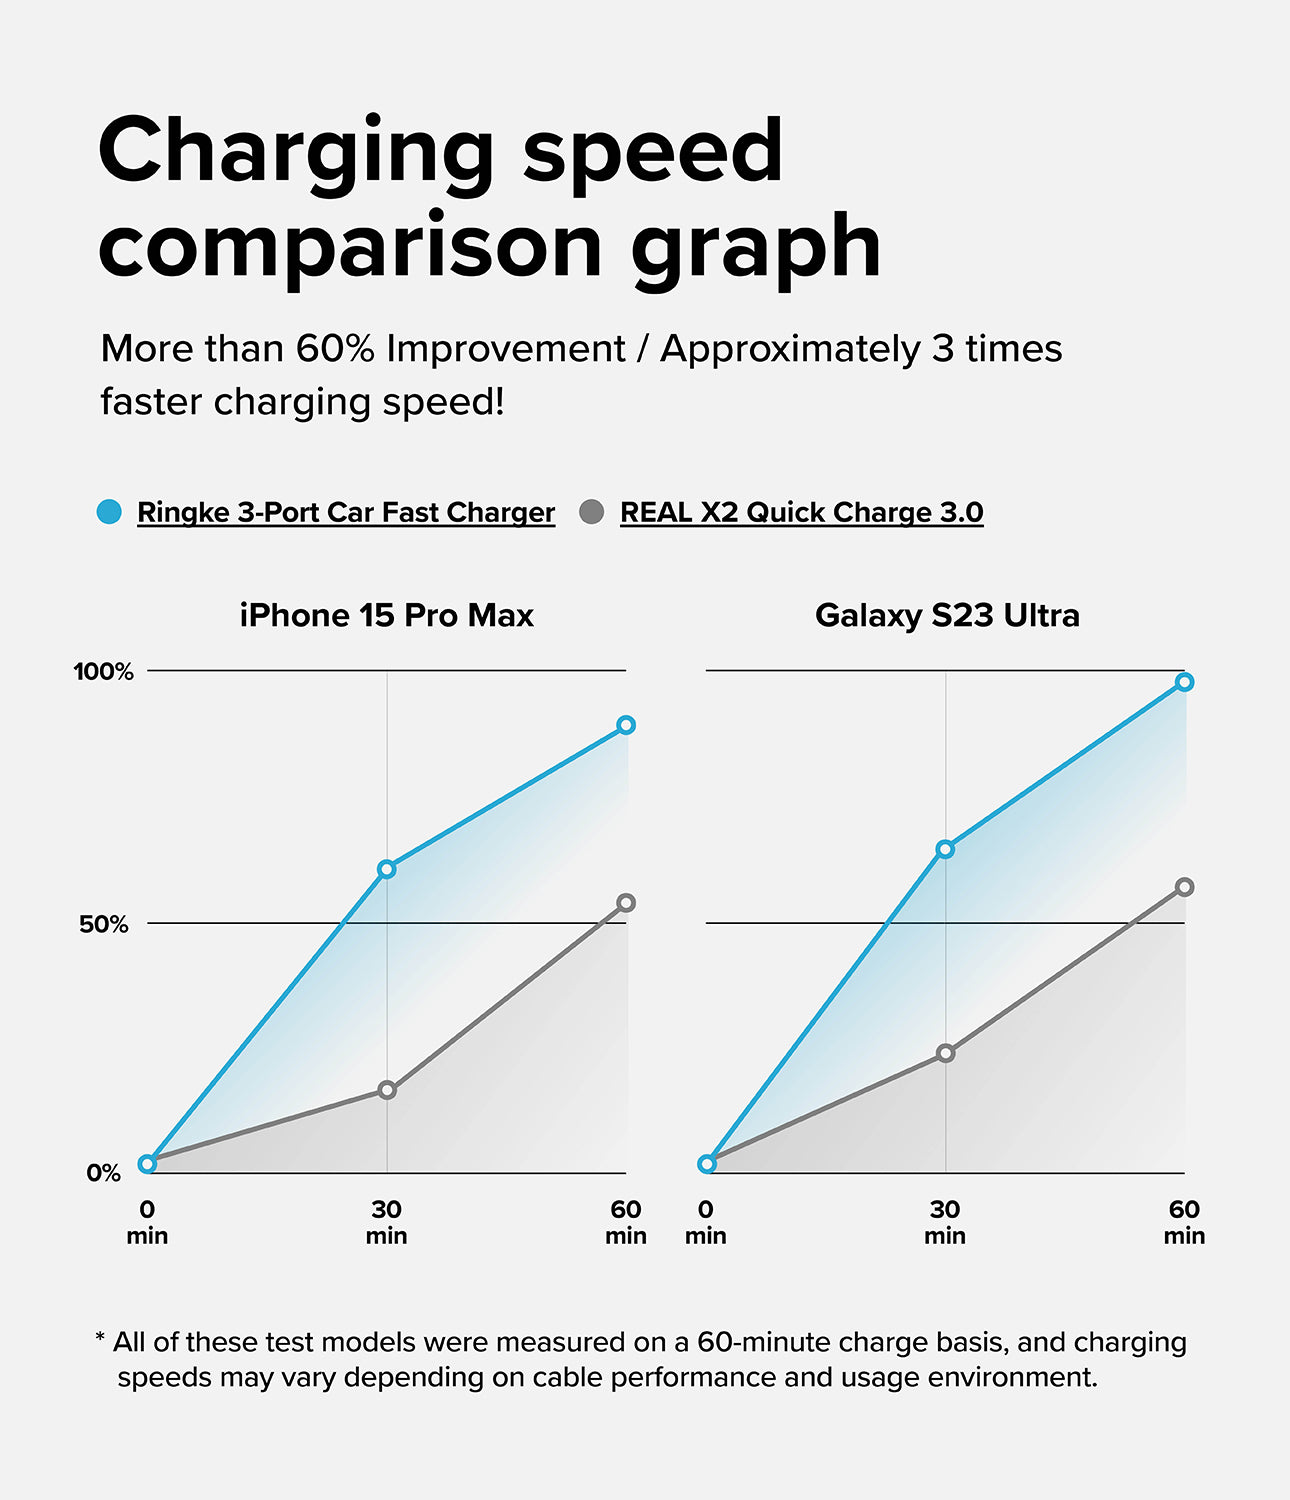 Ringke 3-Port Car Fast Charger - Charging Speed Comparison Graph. More than 60% improvement / Approximately 3 times faster charging speed!